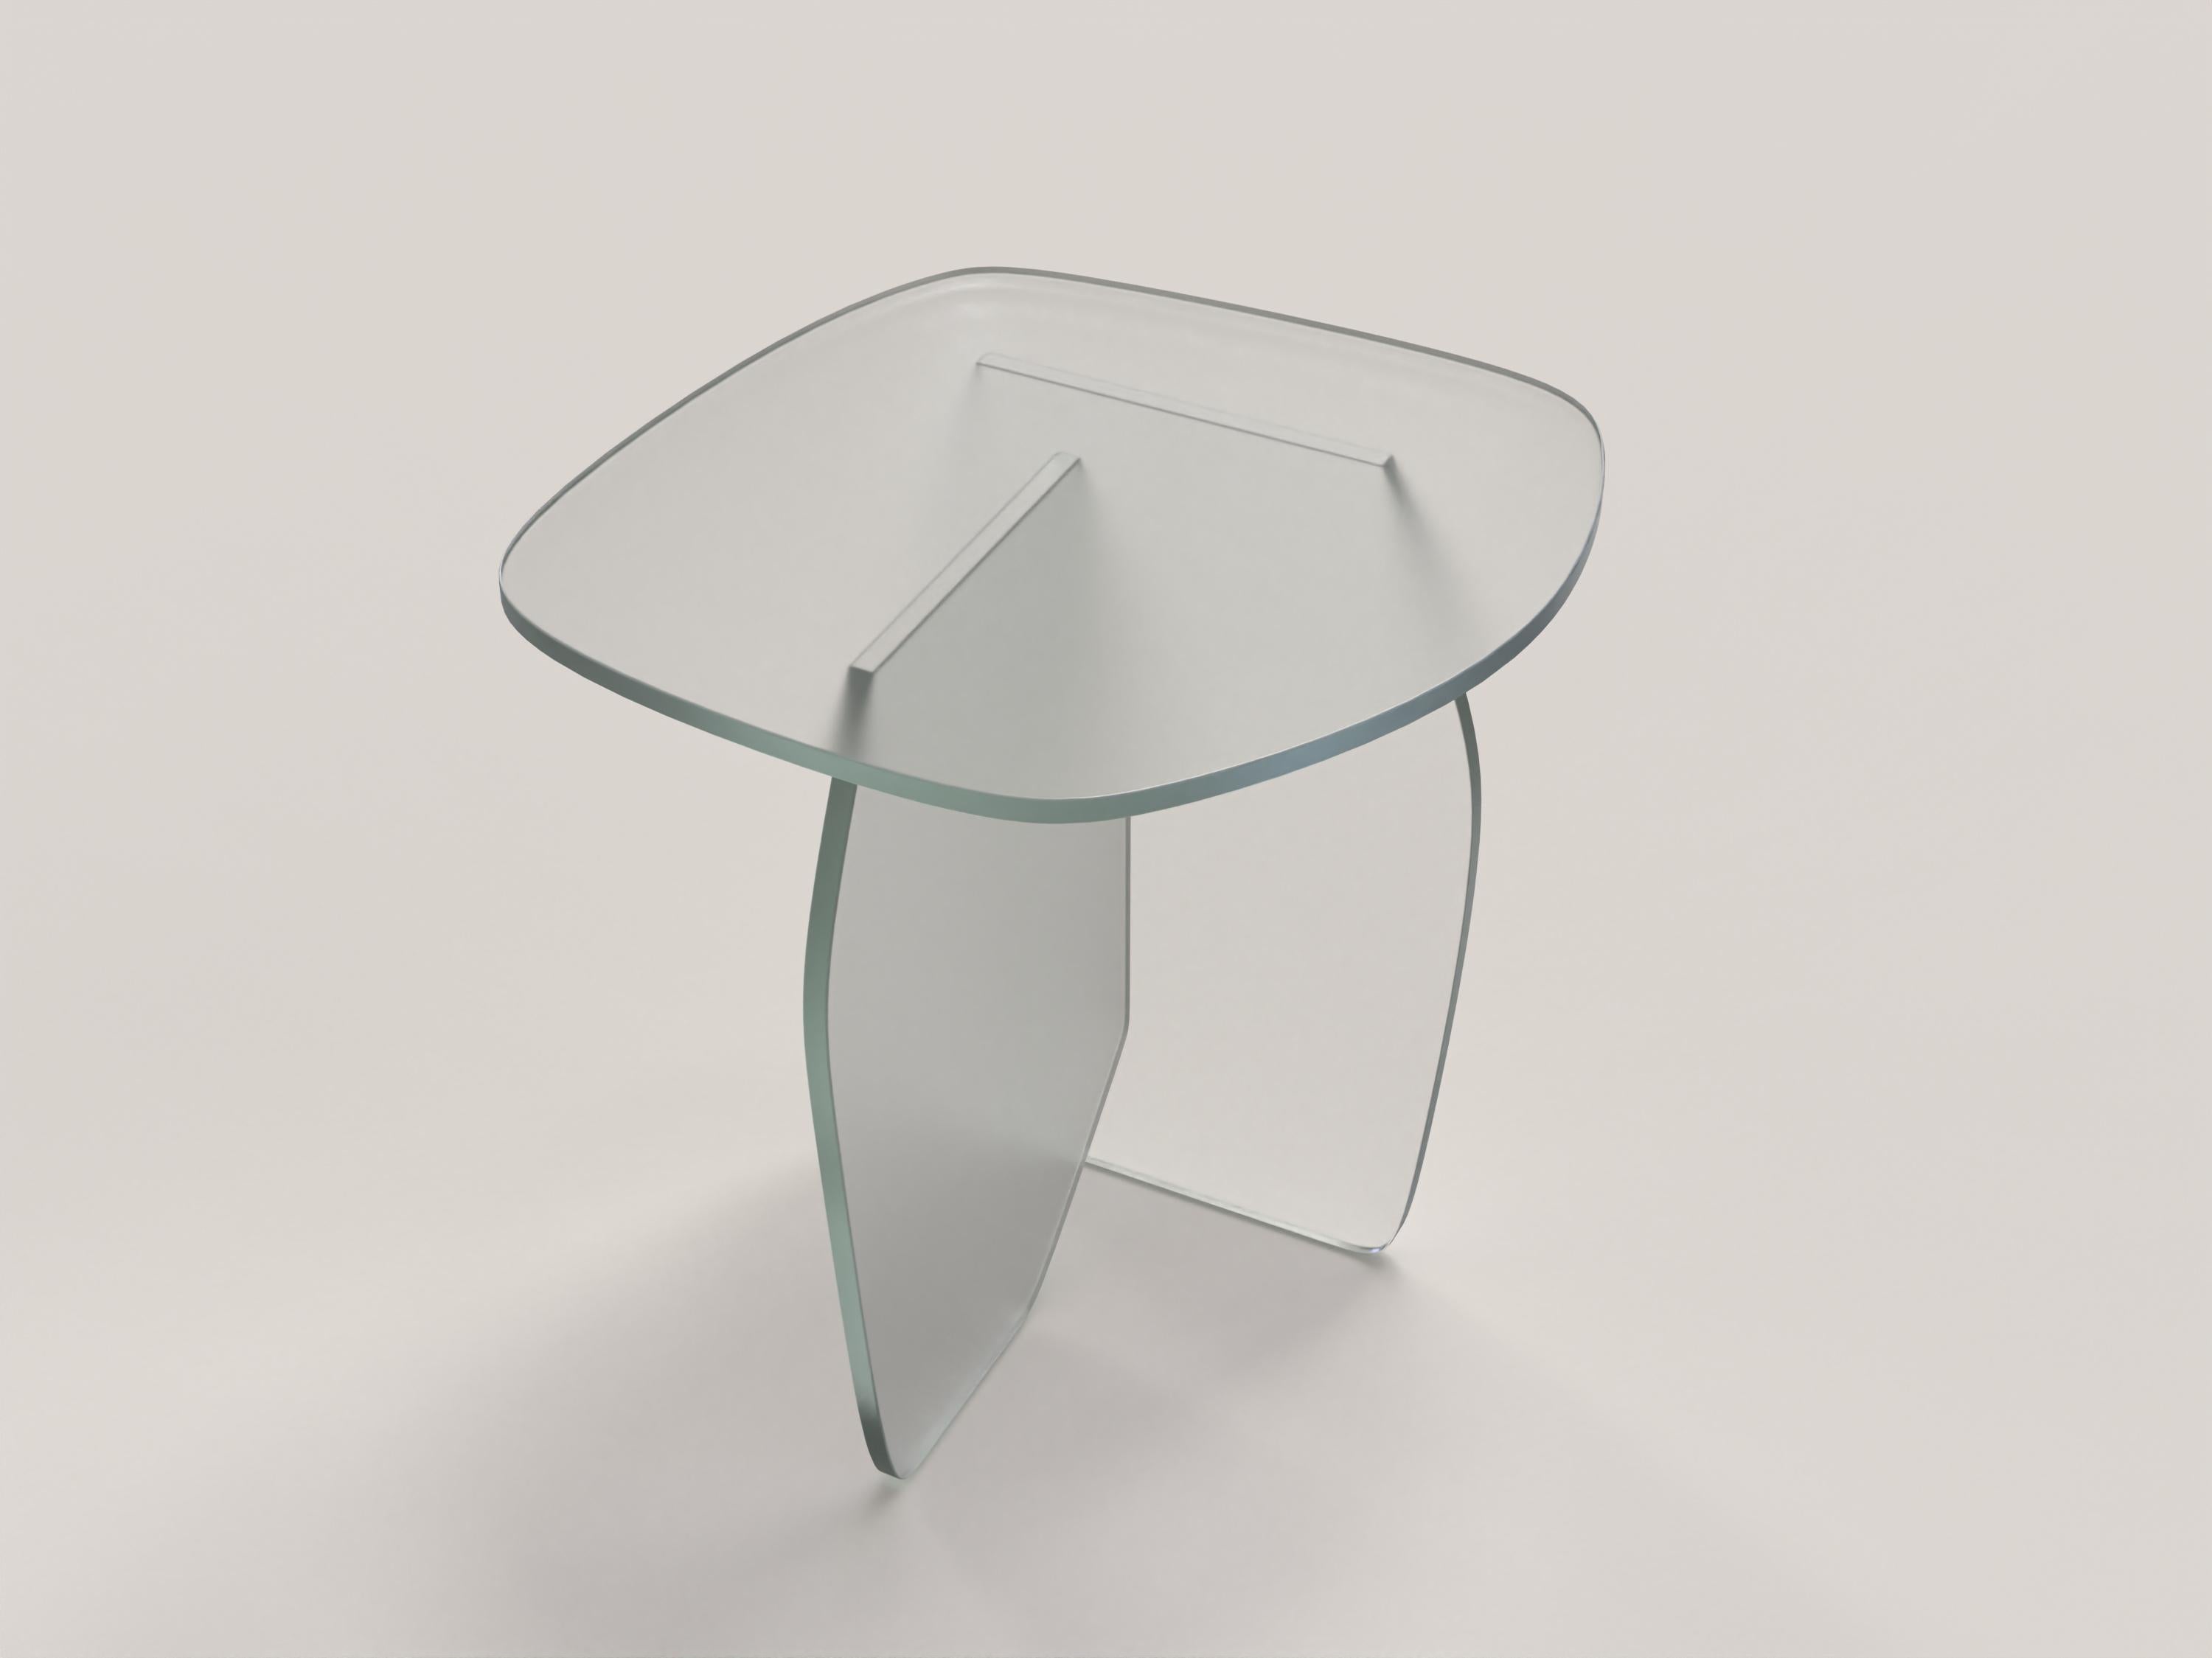 Panorama V1 is a 21st Century side table made by Italian artisans in sanded clear glass. The piece is manufactured in a limited edition of 1000 signed and progressively numbered examples. It is part of the collectible design language Panorama that